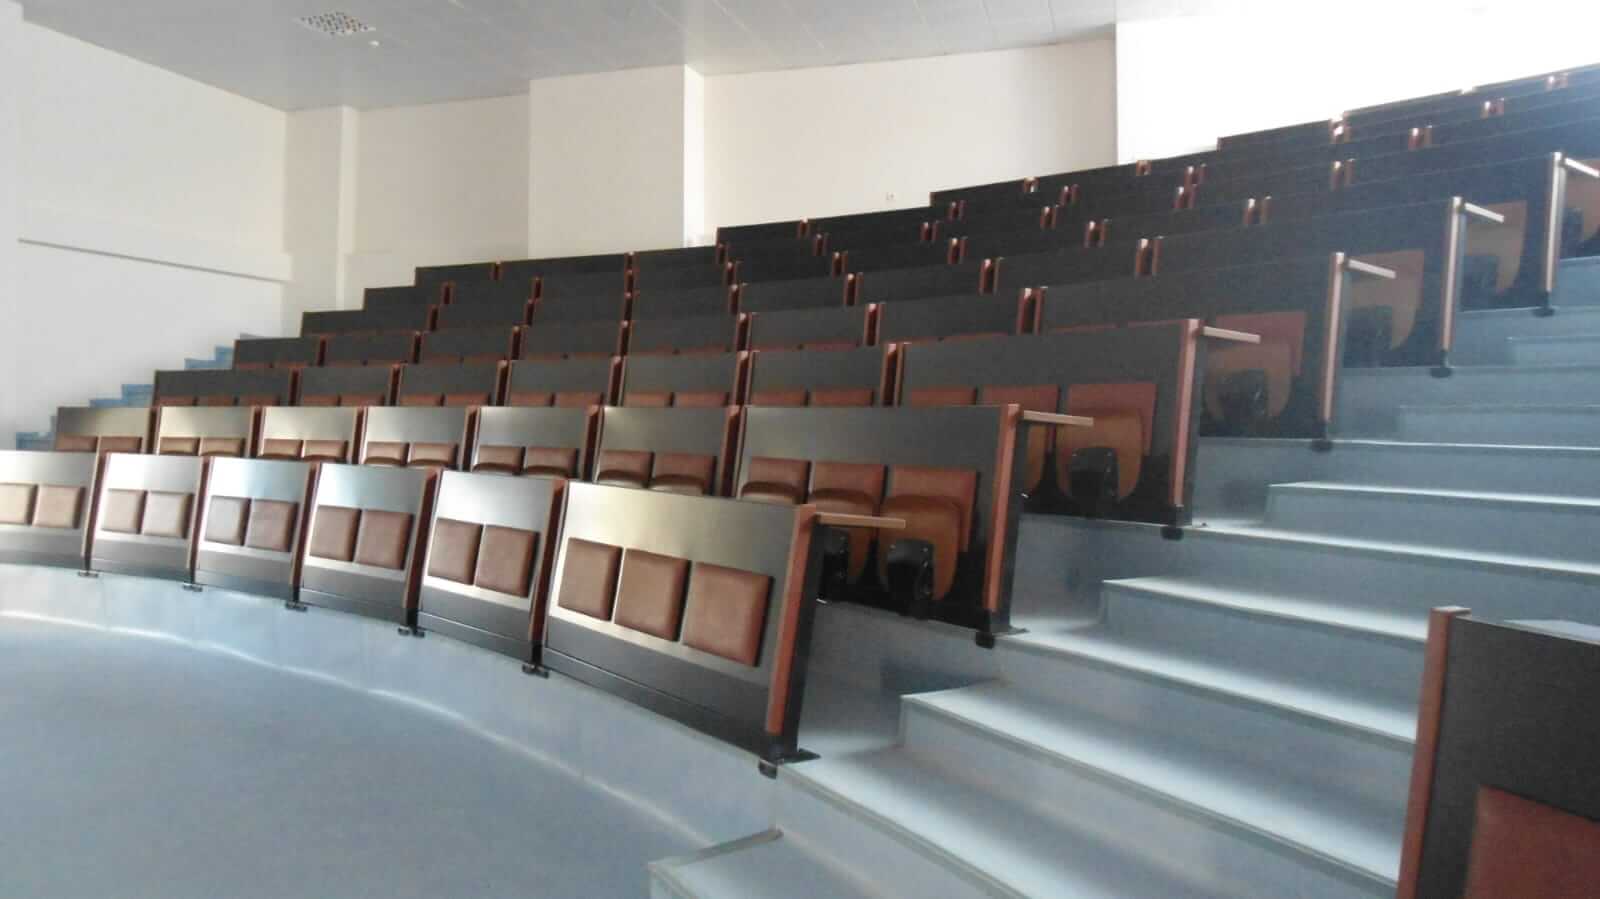 Lecture Seating Projects - Monseat